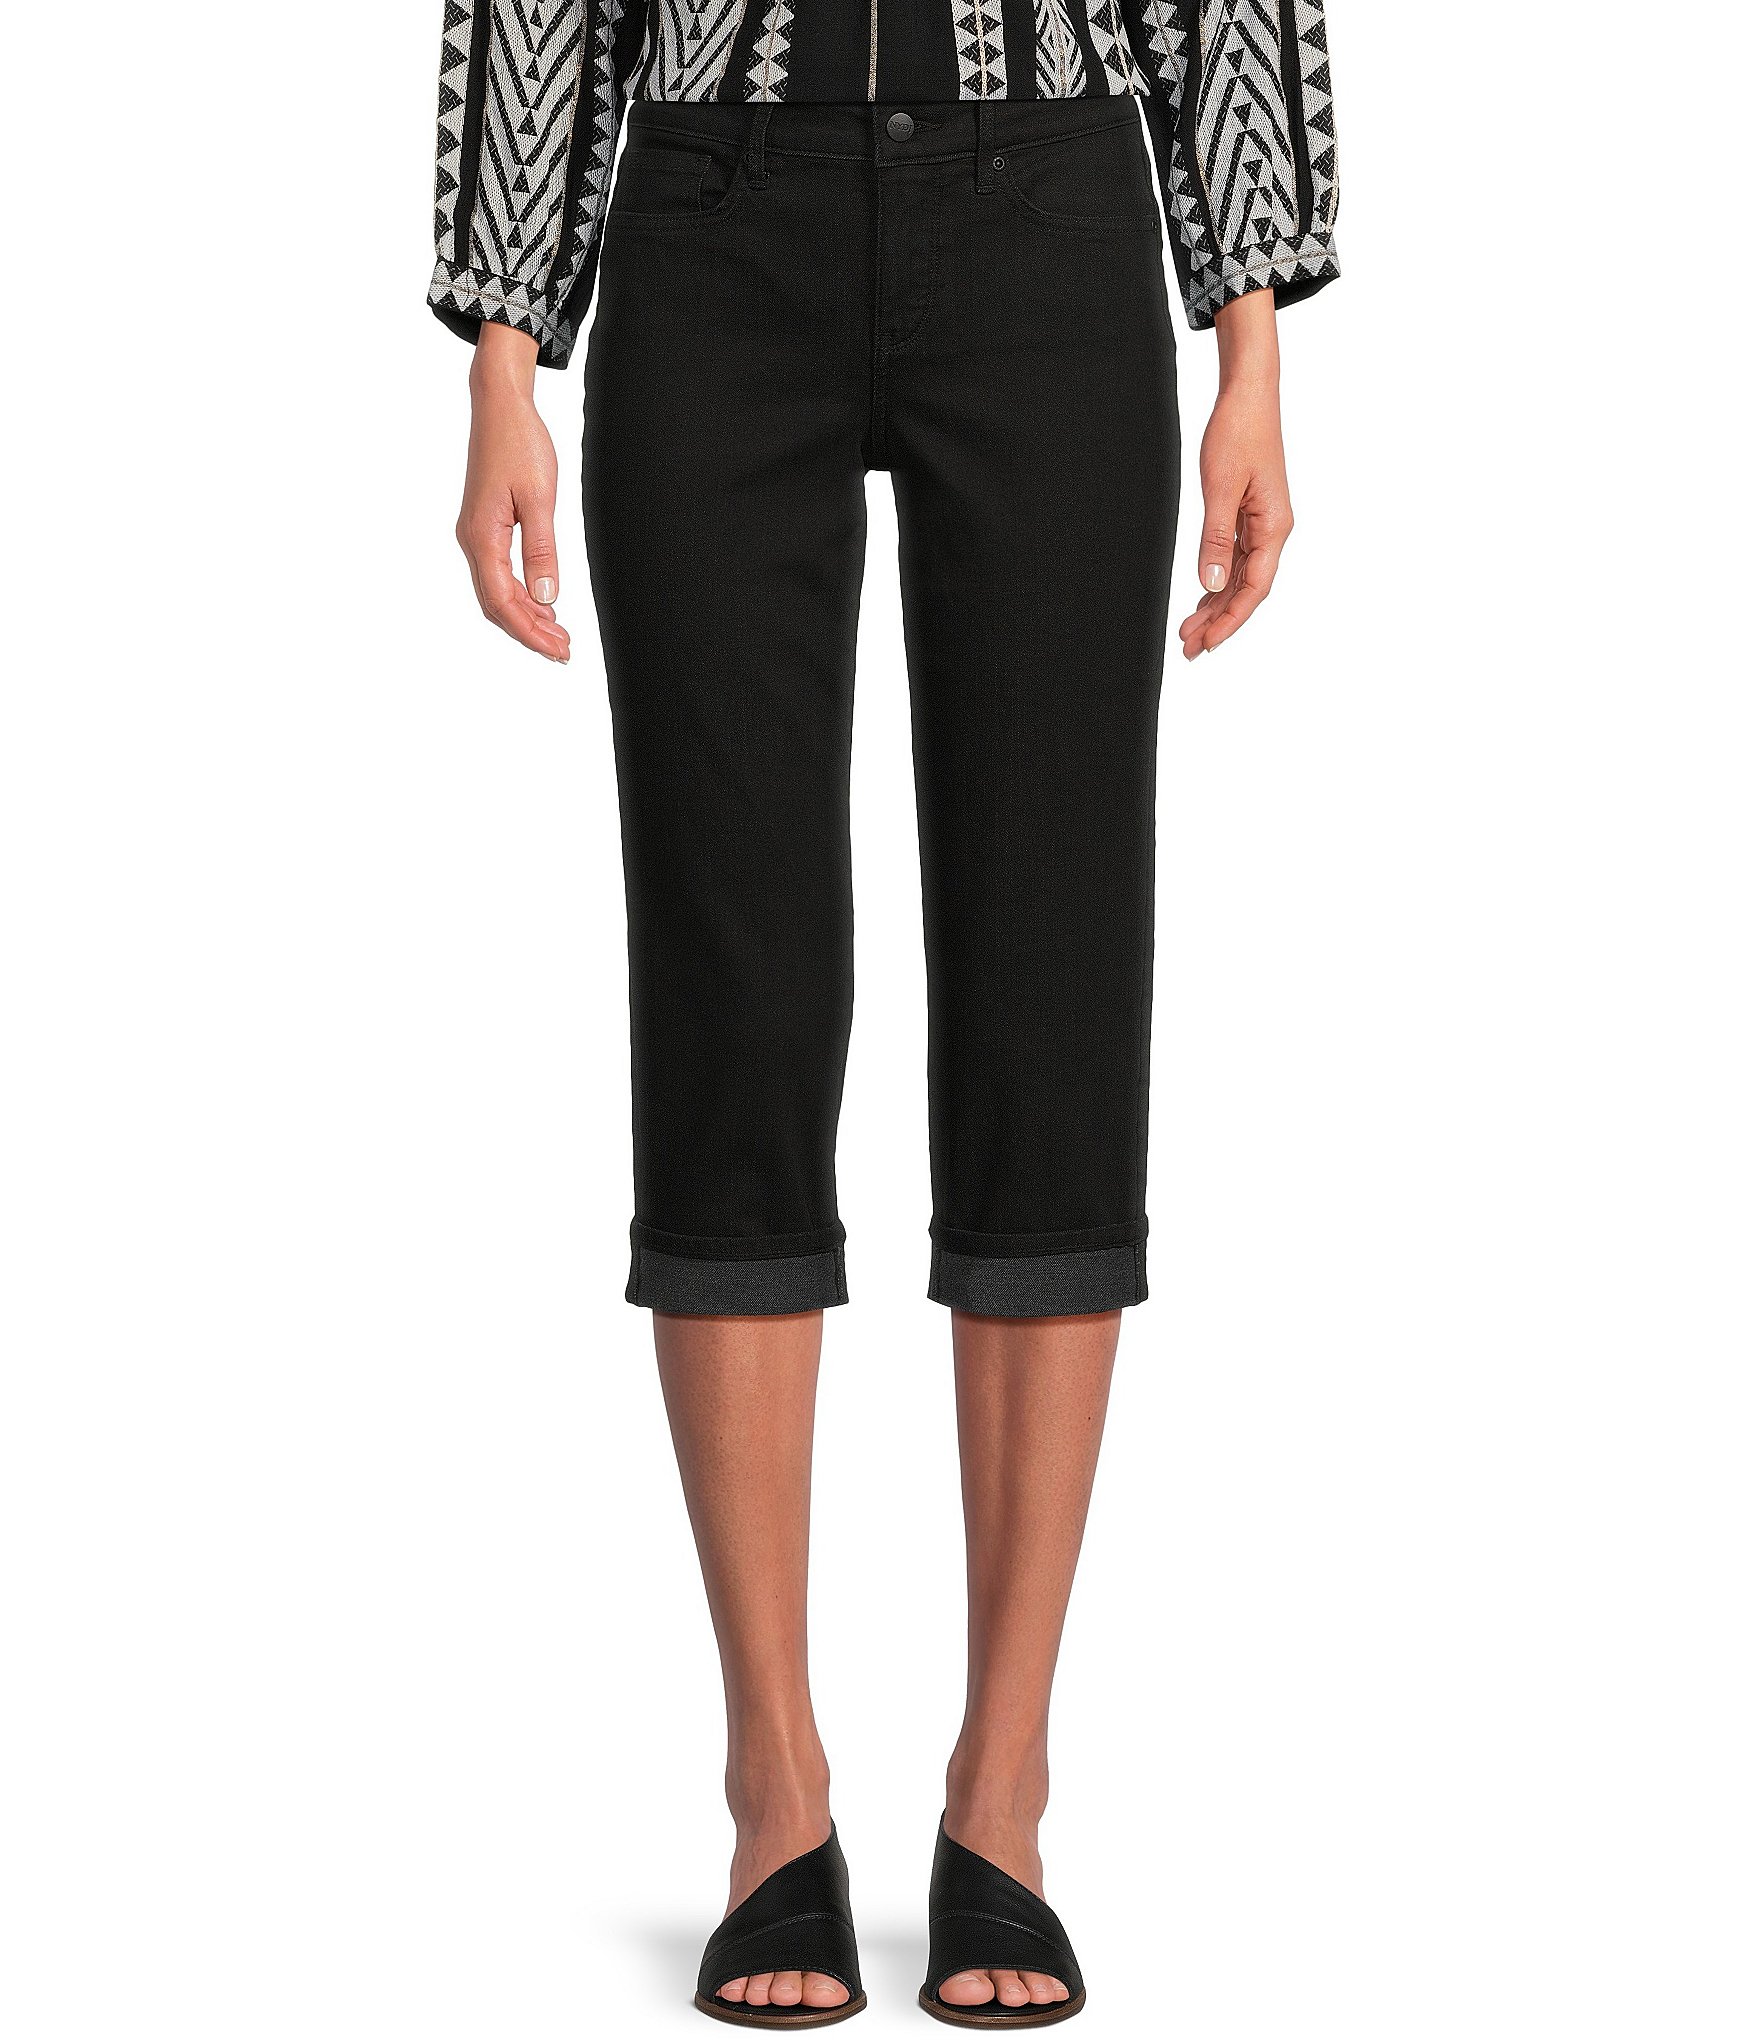 intro., Pants & Jumpsuits, Intro Love The Fit Leggings Plus Size 2x A  Black With Pearl Embellishments